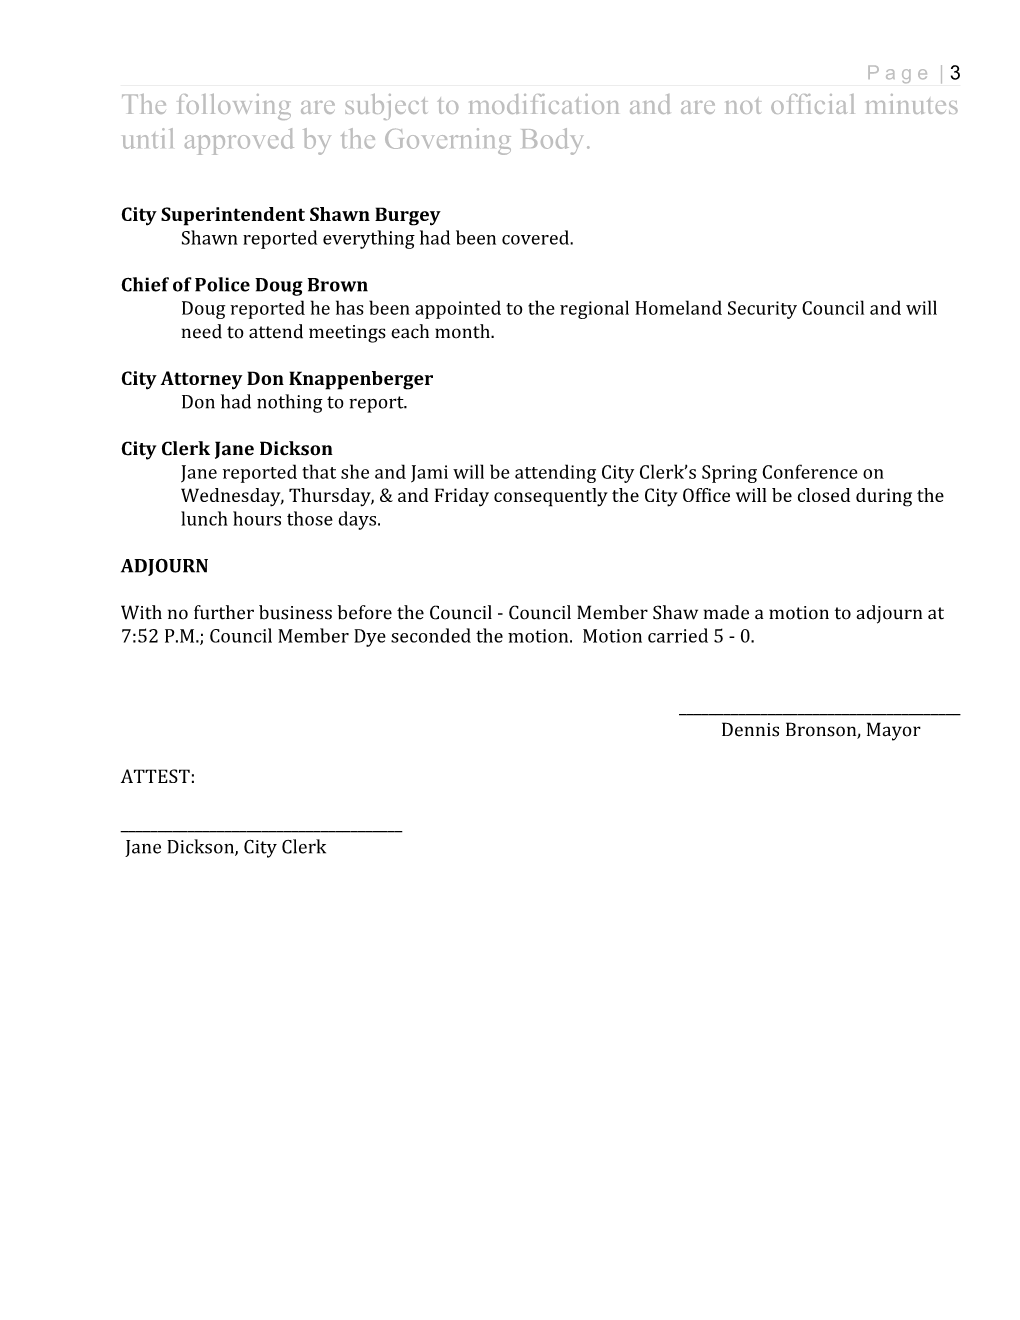 The March 9, 2015Regular Meeting Was Called to Order at 7:00 P.M. by Mayor Dennis Bronson